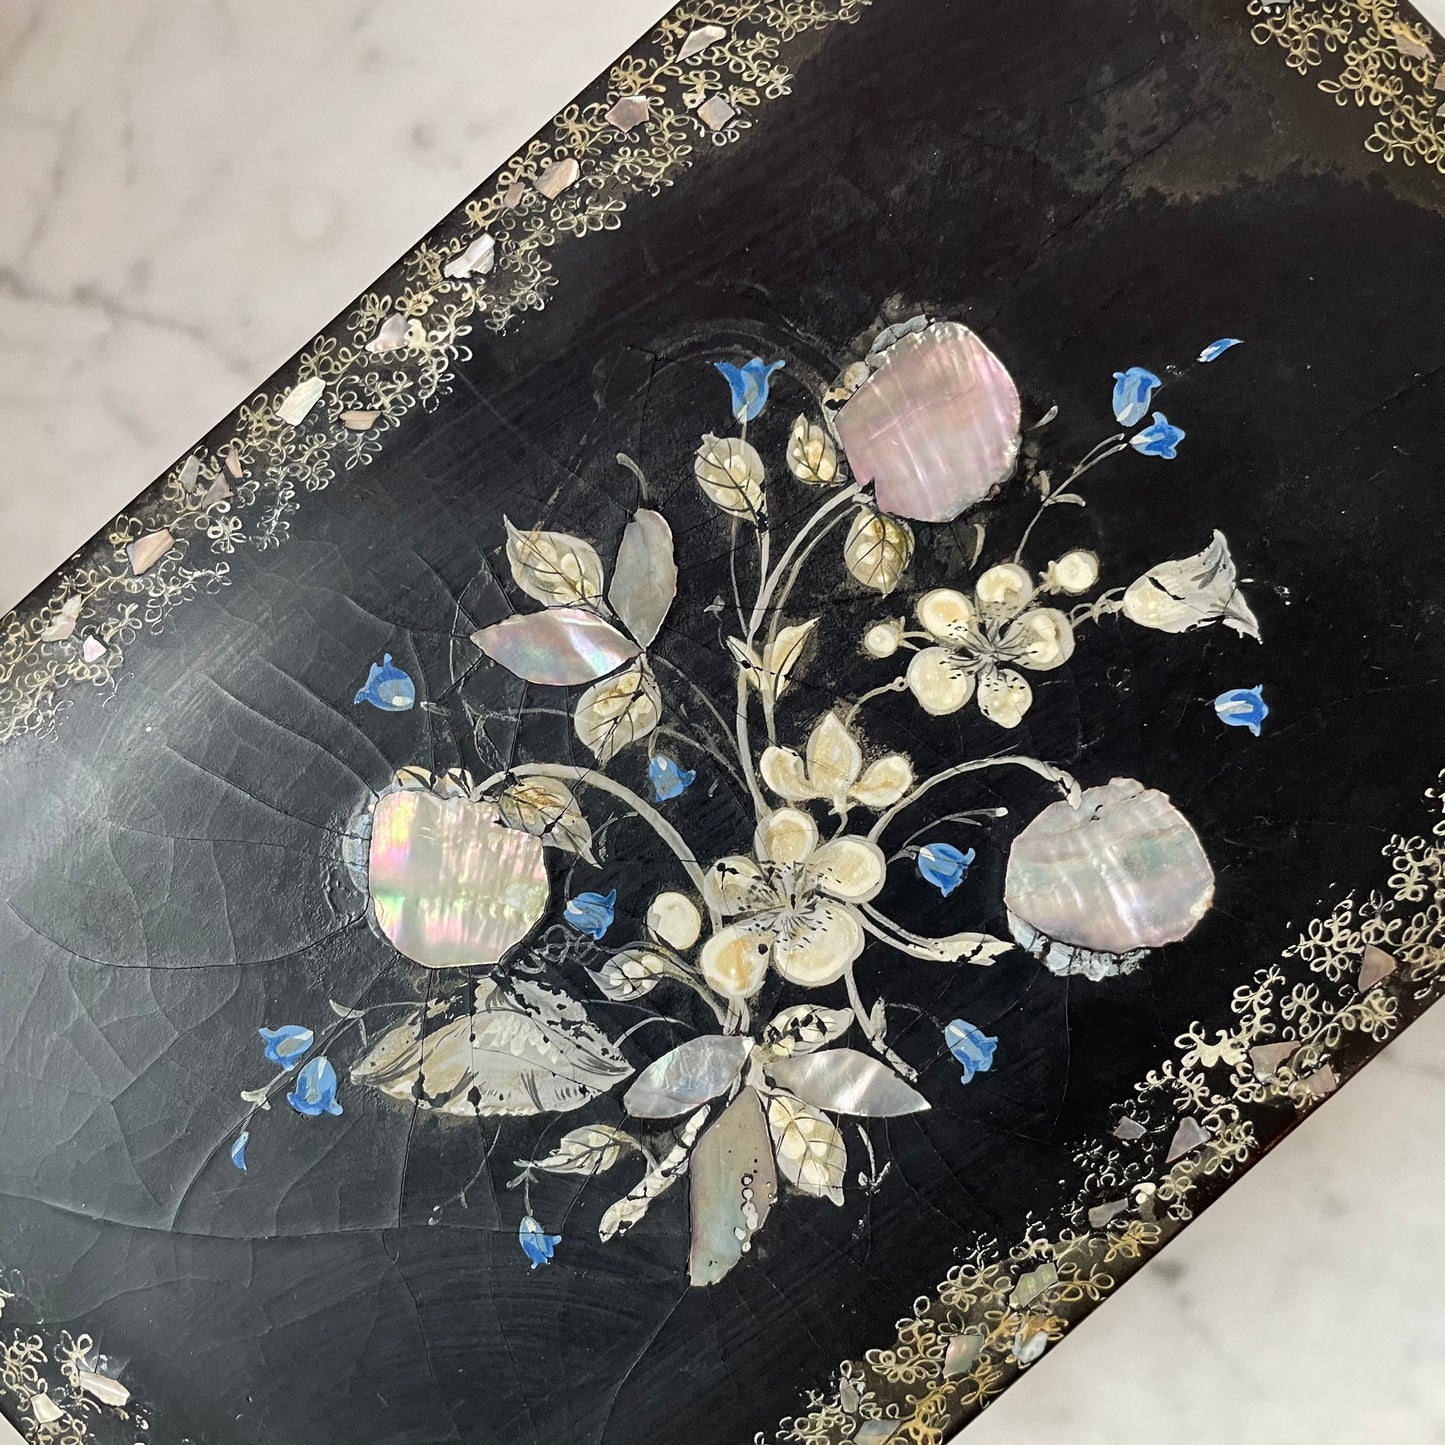 Victorian Mother of Pearl Inlaid Tea Caddy